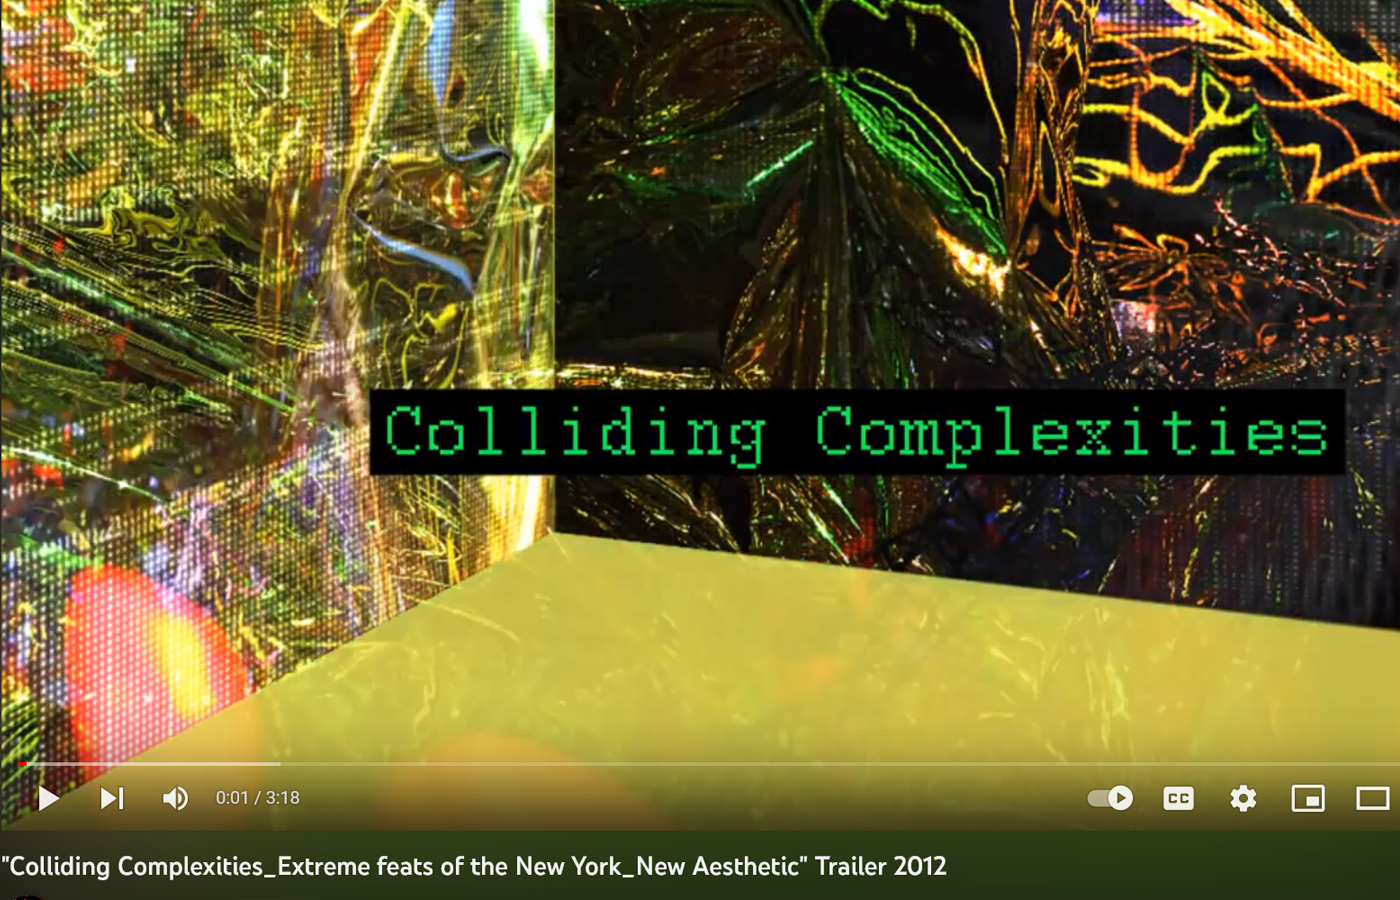 Curated Exhibition by [dNASAb] "Colliding Complexities_Extreme feats of the New York_New Aesthetic" Trailer 2012